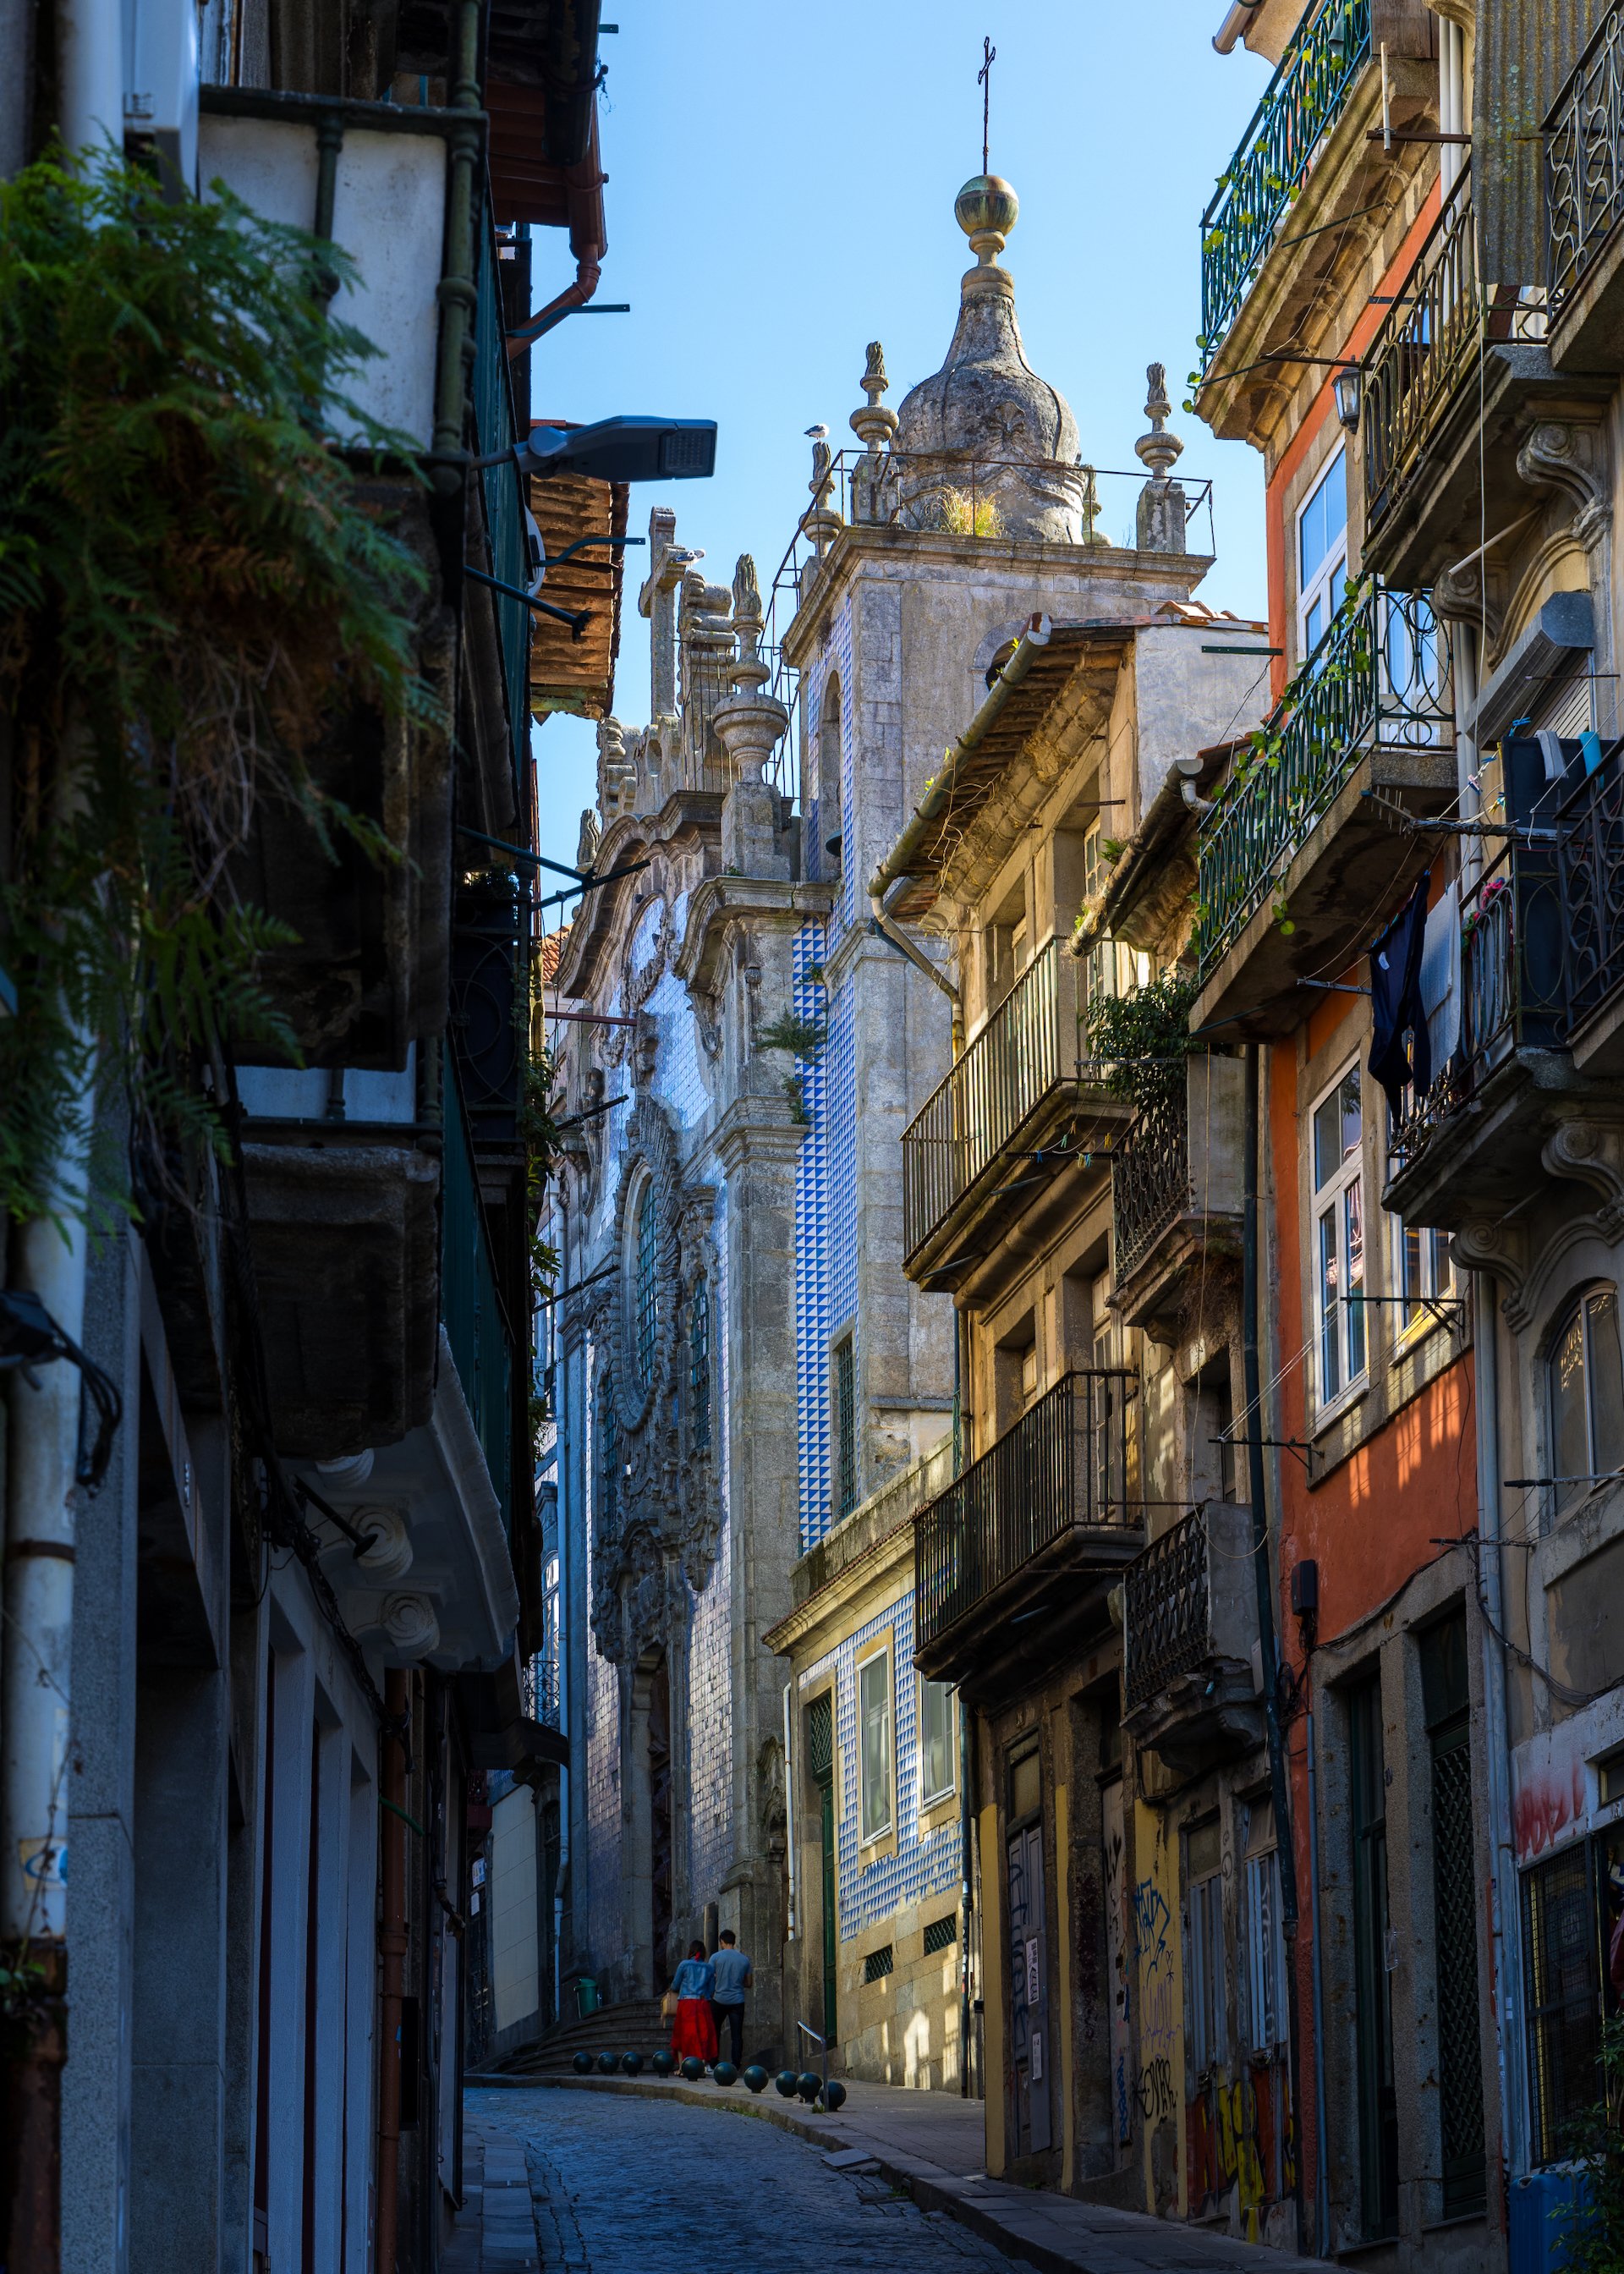  The typical narrow alleys of Porto.  